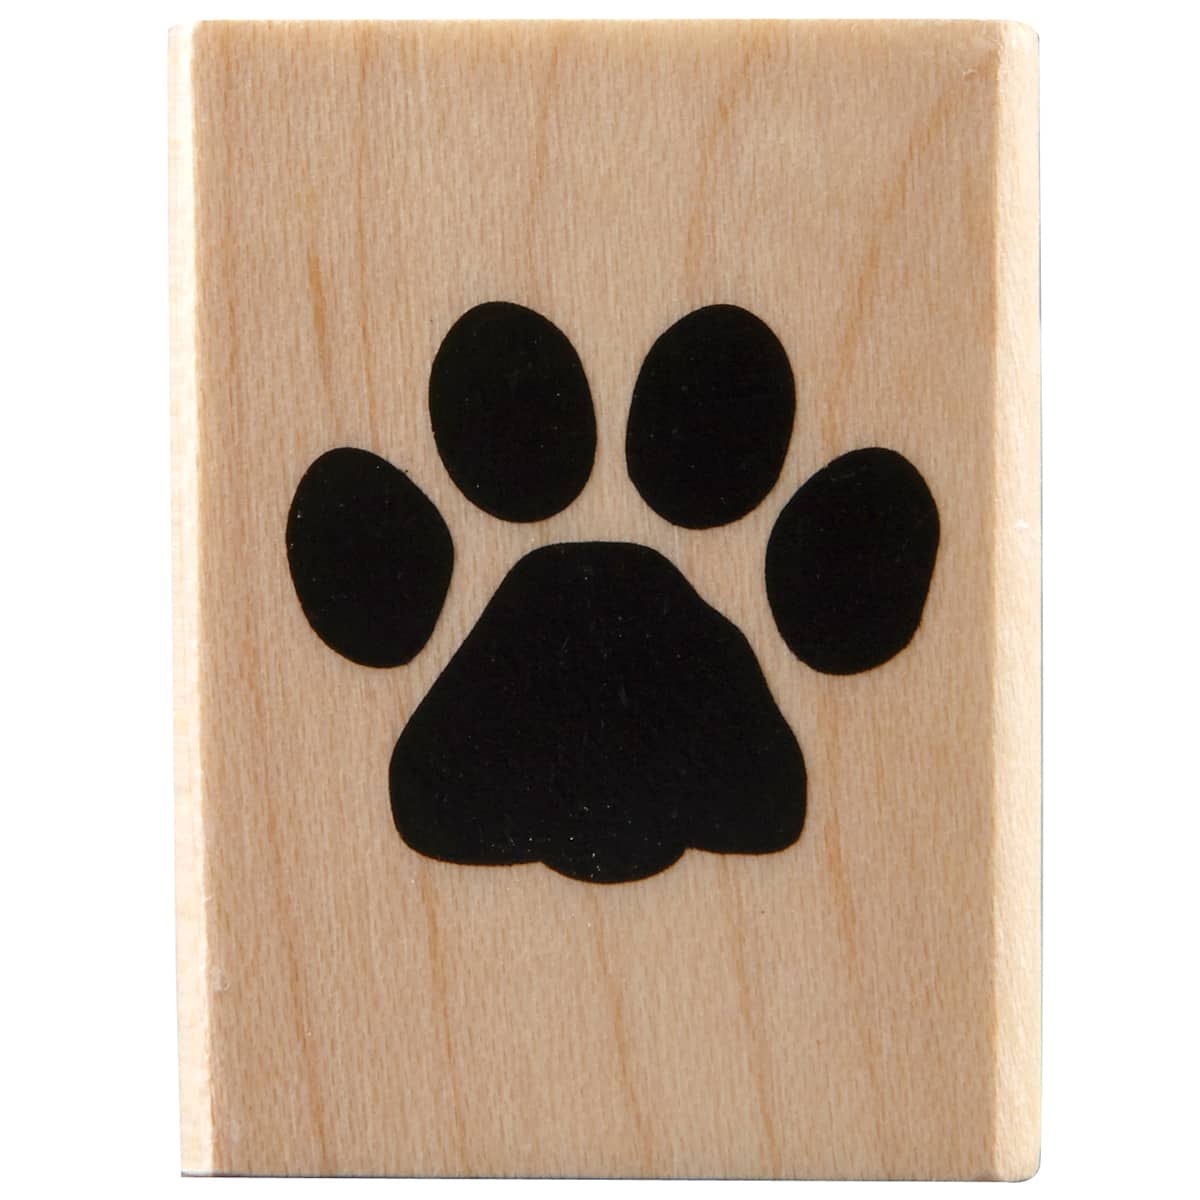 B7110 Wood Mounted Teeny Tiny paw prints rubber stamp 